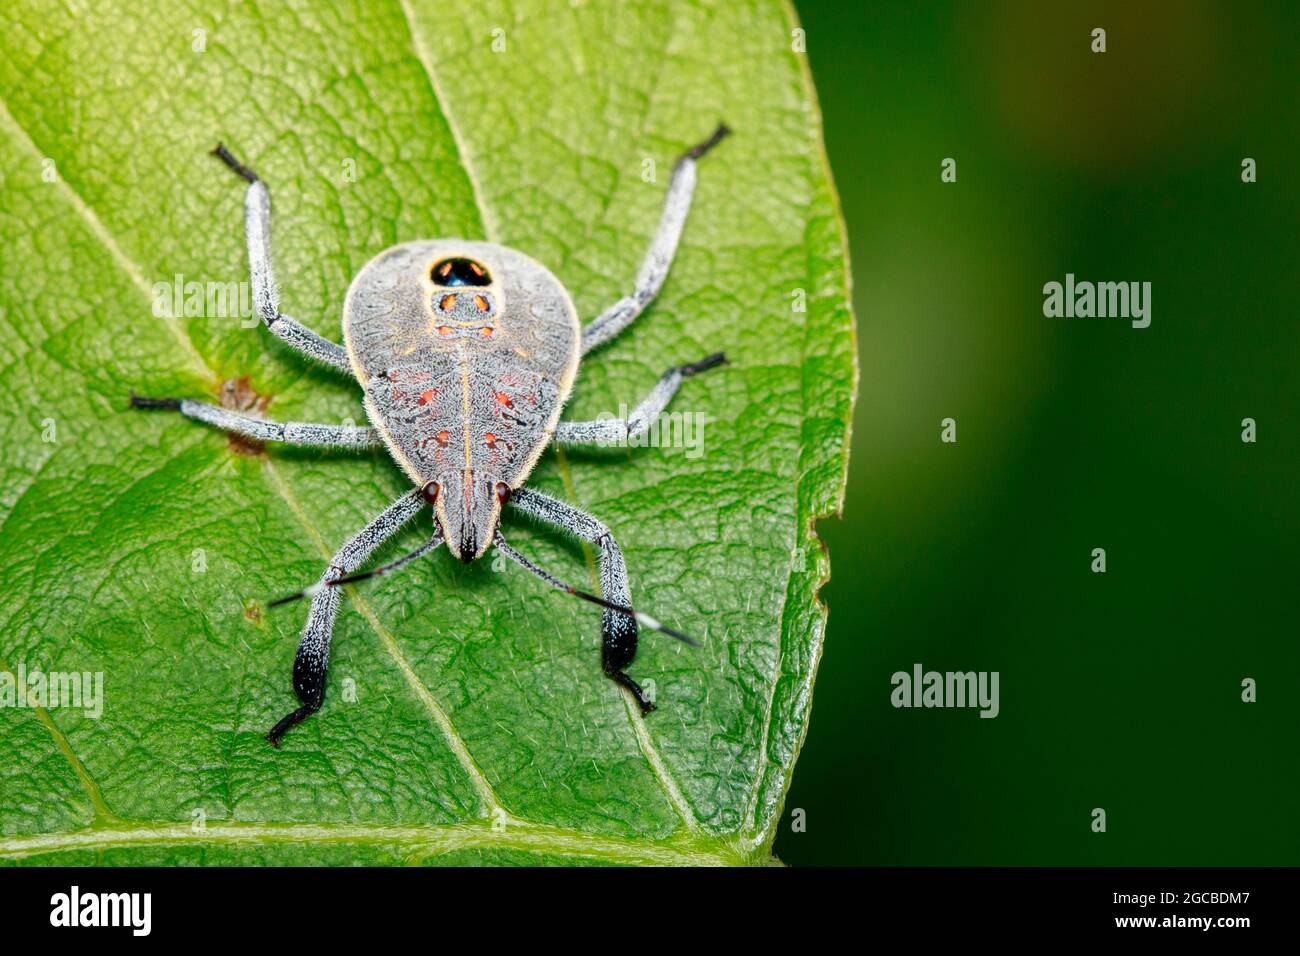 Image of Hemiptera bug on green leaves. Insect. Animal Stock Photo